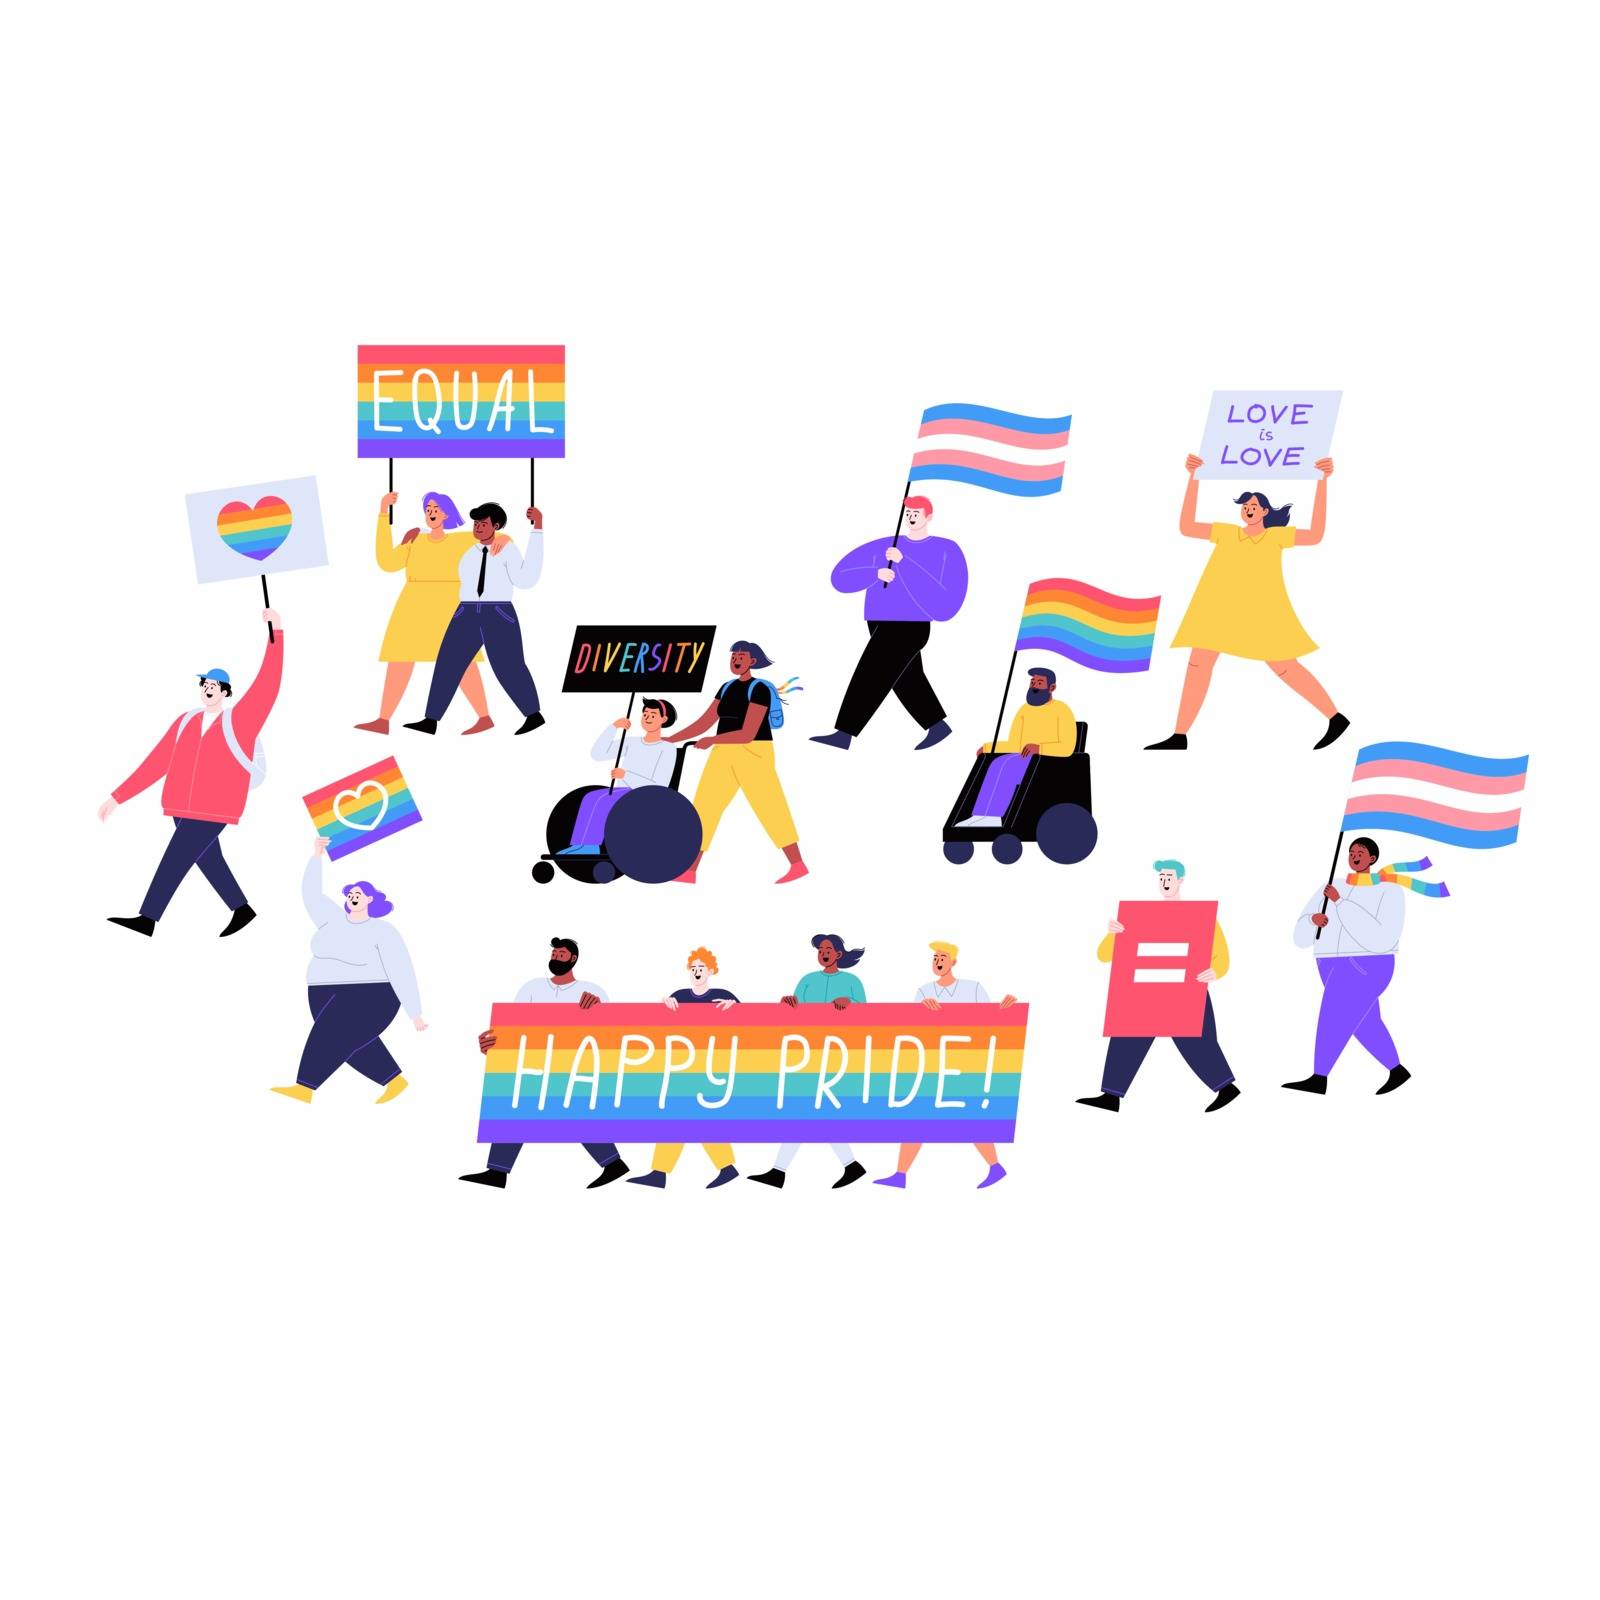 Different people marching on the pride parade holding placards and flags. Pride month concept